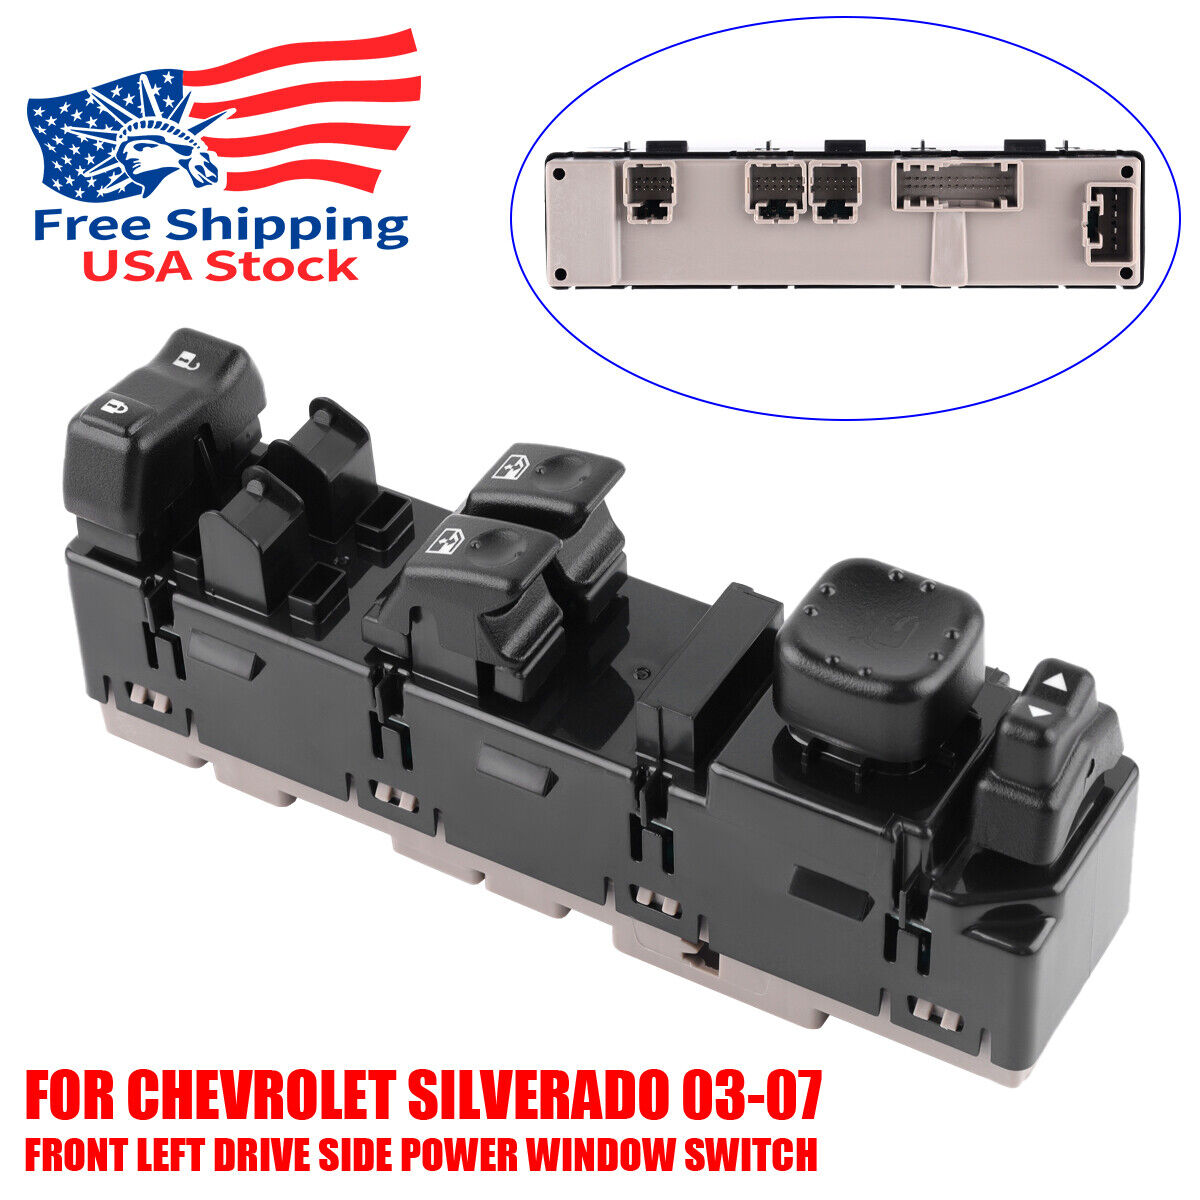 Pack of 1 for Chevy Silverado 03-07 Front Left Drive Side Power Window Switch